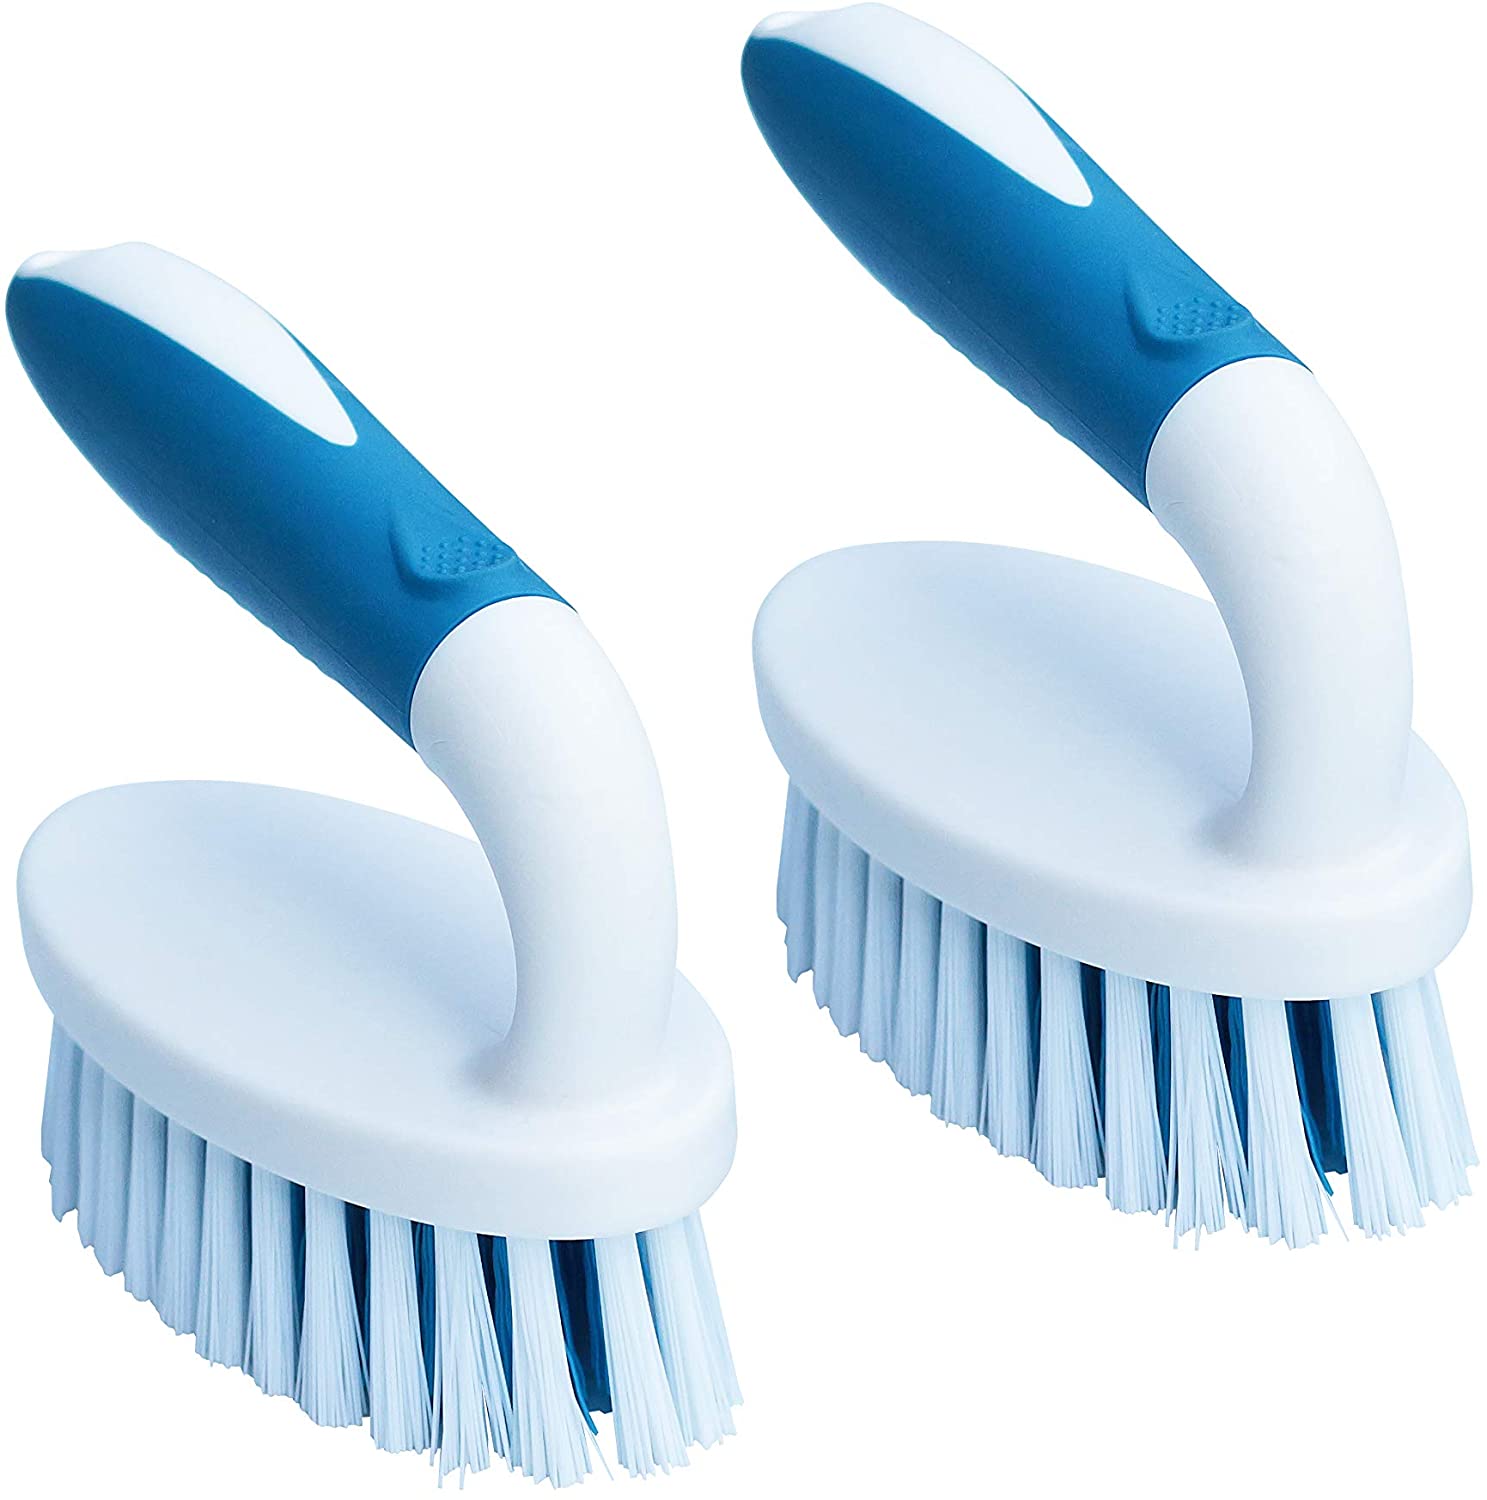 Cleaning Brushes –